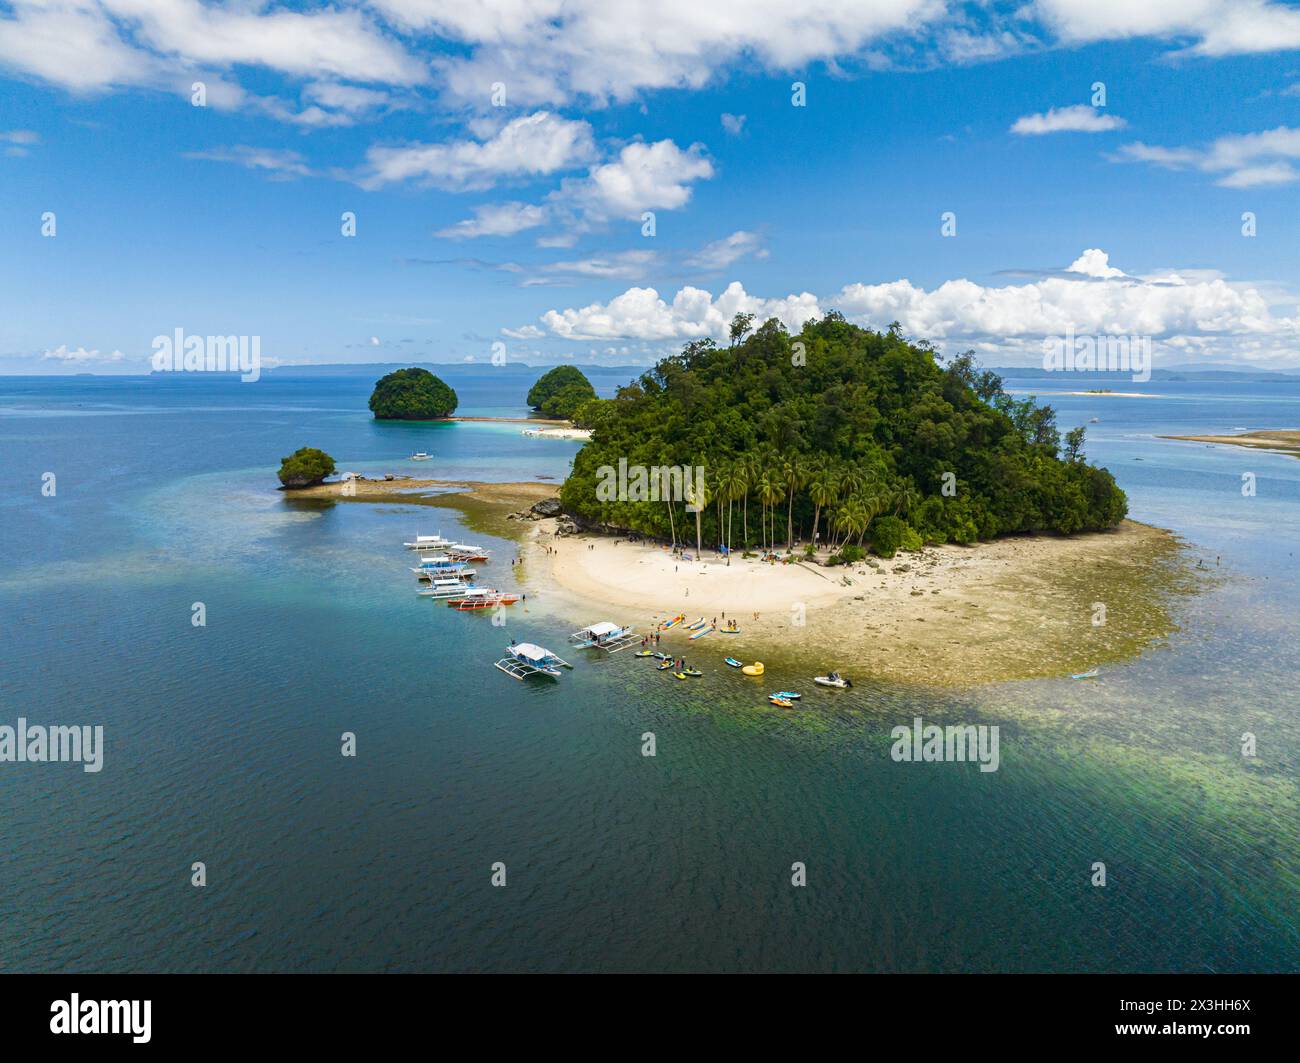 Hiyor-Hiyoran Island with white sand beach and boats. Britania Group of Islands. Surigao del Sur, Philippines. Stock Photo